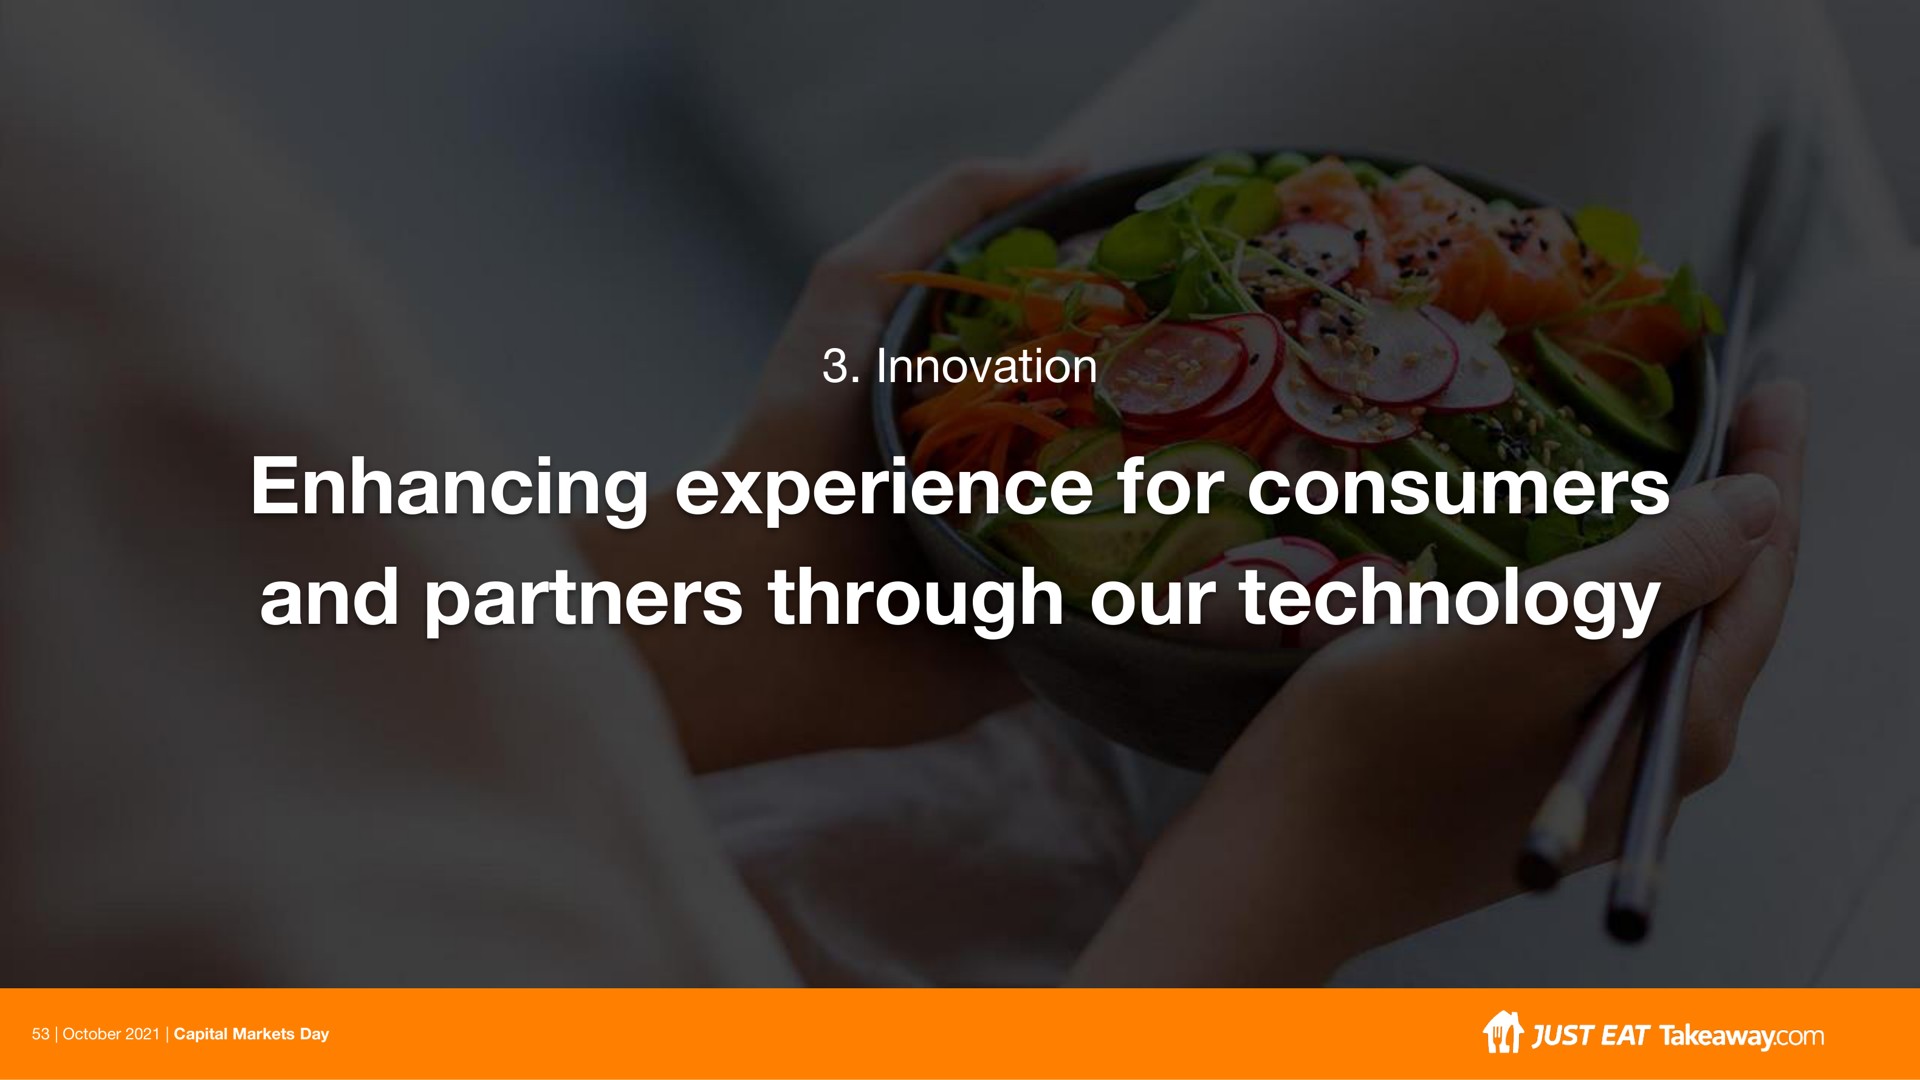 innovation enhancing experience for consumers and partners through our technology | Just Eat Takeaway.com